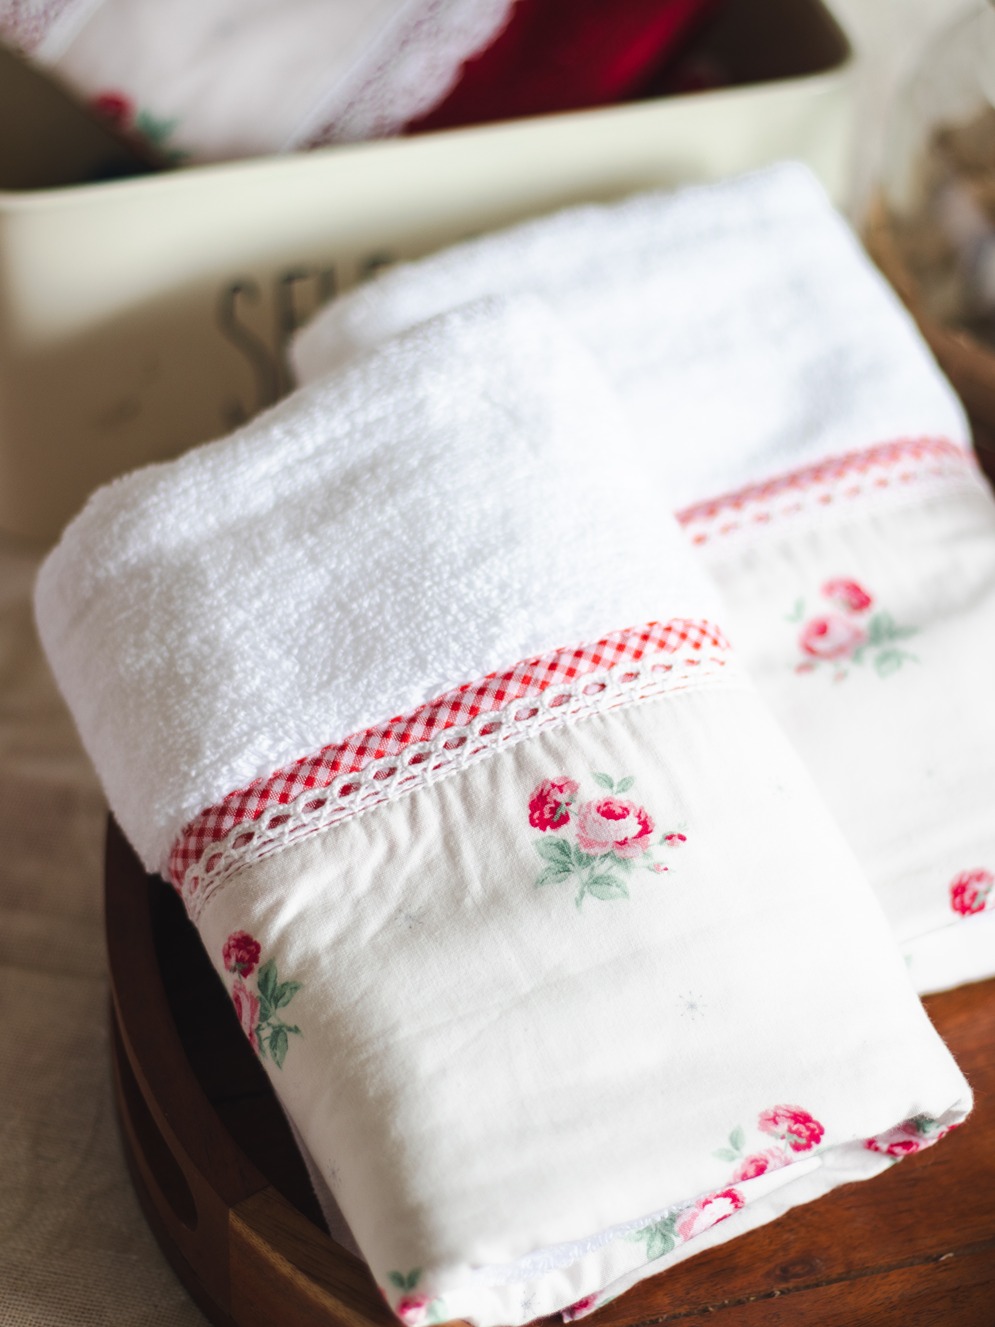 Premium Hand Towel - White with floral, gingham and lace detailing (Single Unit) (15